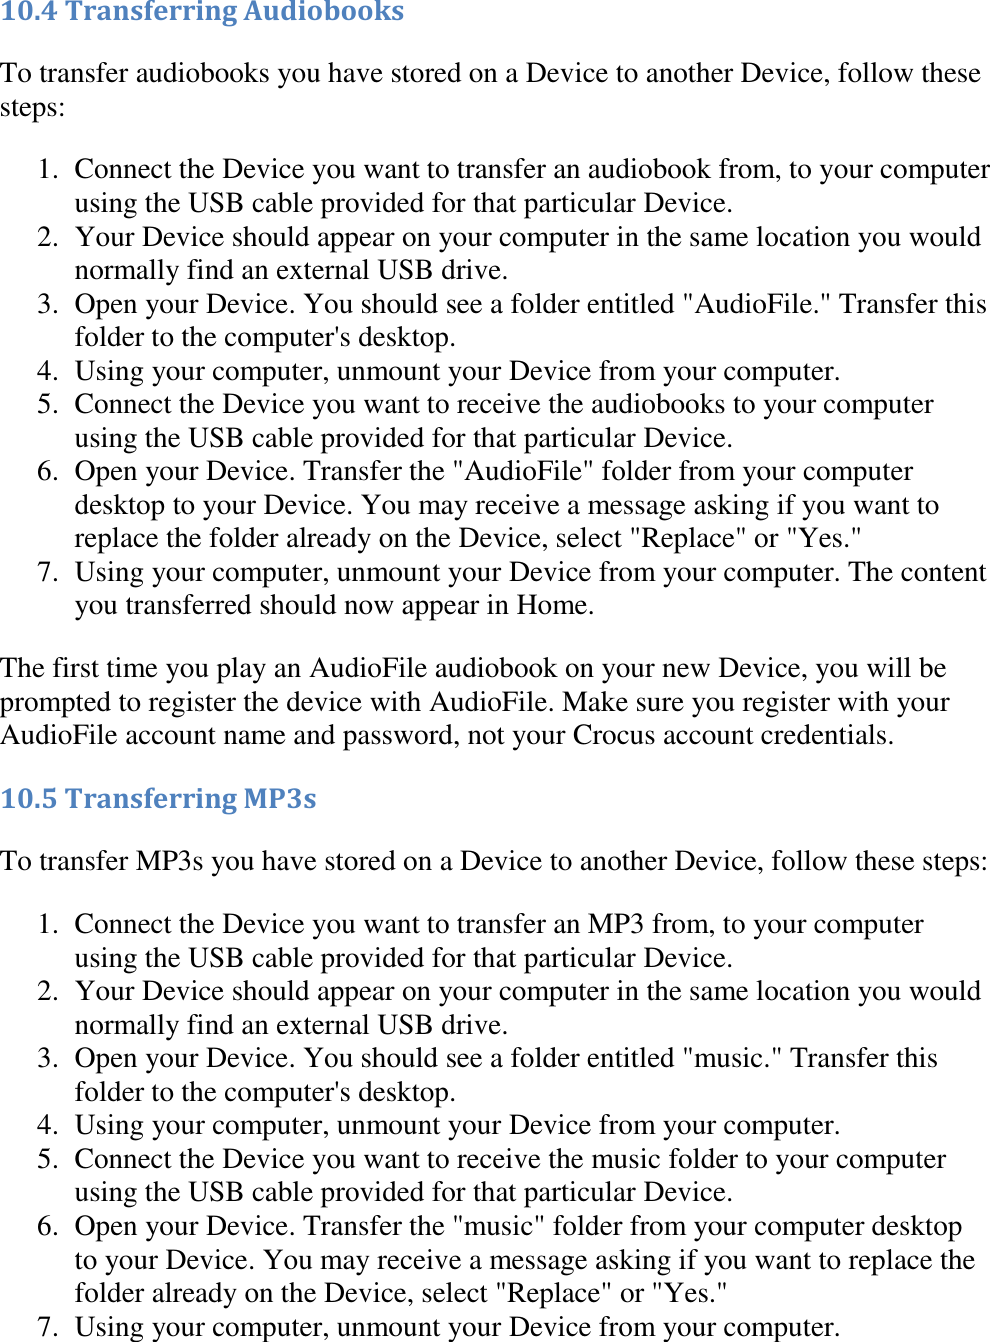   10.4 Transferring Audiobooks To transfer audiobooks you have stored on a Device to another Device, follow these steps: 1. Connect the Device you want to transfer an audiobook from, to your computer using the USB cable provided for that particular Device.  2. Your Device should appear on your computer in the same location you would normally find an external USB drive.  3. Open your Device. You should see a folder entitled &quot;AudioFile.&quot; Transfer this folder to the computer&apos;s desktop.  4. Using your computer, unmount your Device from your computer.  5. Connect the Device you want to receive the audiobooks to your computer using the USB cable provided for that particular Device.  6. Open your Device. Transfer the &quot;AudioFile&quot; folder from your computer desktop to your Device. You may receive a message asking if you want to replace the folder already on the Device, select &quot;Replace&quot; or &quot;Yes.&quot;  7. Using your computer, unmount your Device from your computer. The content you transferred should now appear in Home.  The first time you play an AudioFile audiobook on your new Device, you will be prompted to register the device with AudioFile. Make sure you register with your AudioFile account name and password, not your Crocus account credentials. 10.5 Transferring MP3s To transfer MP3s you have stored on a Device to another Device, follow these steps: 1. Connect the Device you want to transfer an MP3 from, to your computer using the USB cable provided for that particular Device.  2. Your Device should appear on your computer in the same location you would normally find an external USB drive.  3. Open your Device. You should see a folder entitled &quot;music.&quot; Transfer this folder to the computer&apos;s desktop.  4. Using your computer, unmount your Device from your computer.  5. Connect the Device you want to receive the music folder to your computer using the USB cable provided for that particular Device.  6. Open your Device. Transfer the &quot;music&quot; folder from your computer desktop to your Device. You may receive a message asking if you want to replace the folder already on the Device, select &quot;Replace&quot; or &quot;Yes.&quot;  7. Using your computer, unmount your Device from your computer.  